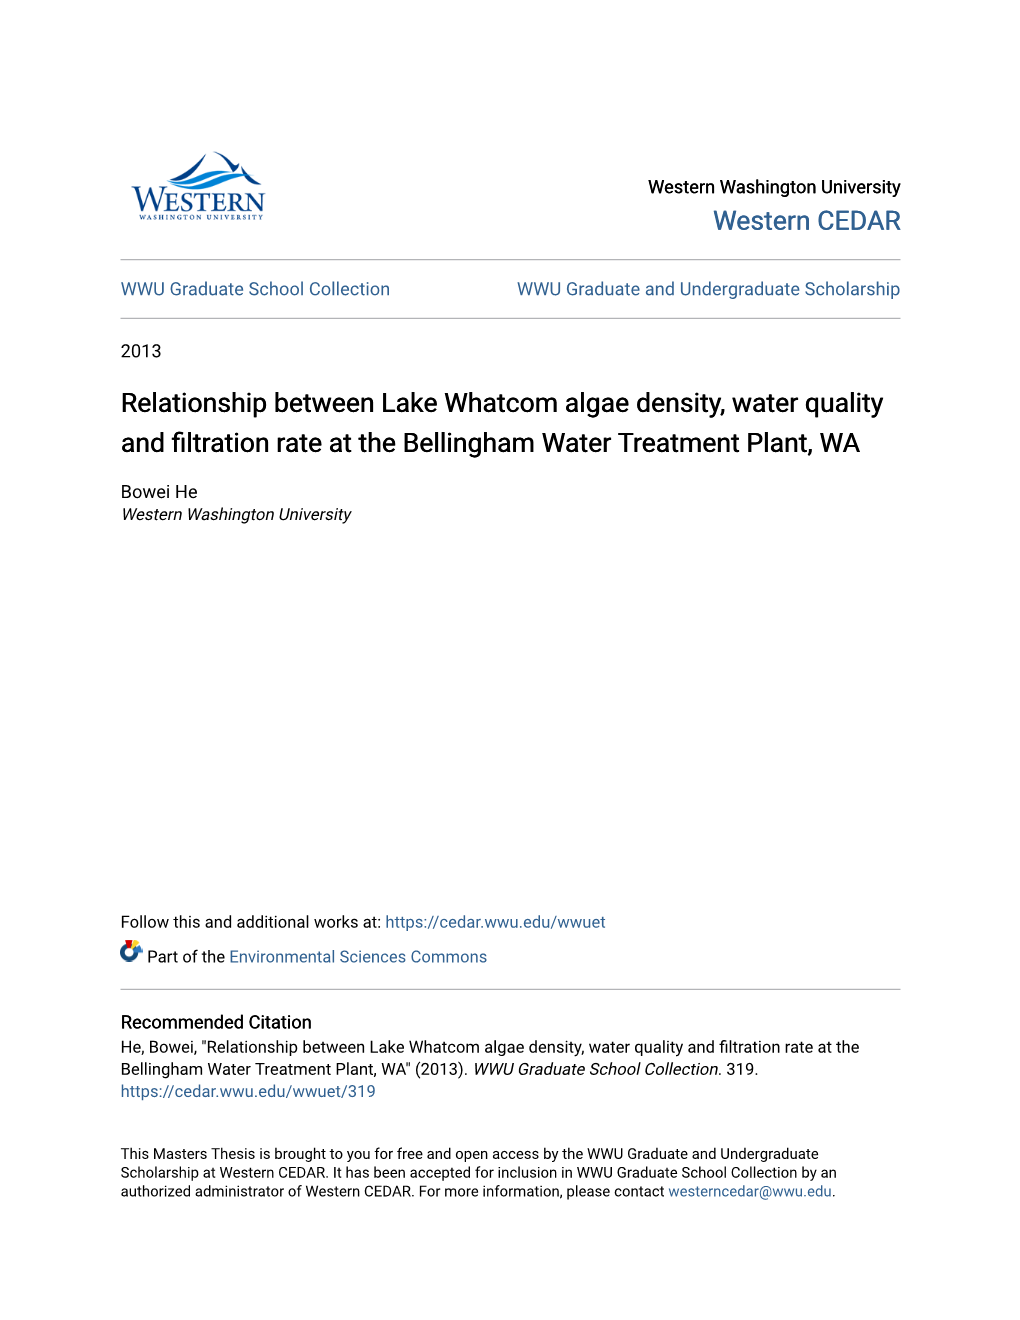 Relationship Between Lake Whatcom Algae Density, Water Quality and Filtration Rate at the Bellingham Water Treatment Plant, WA